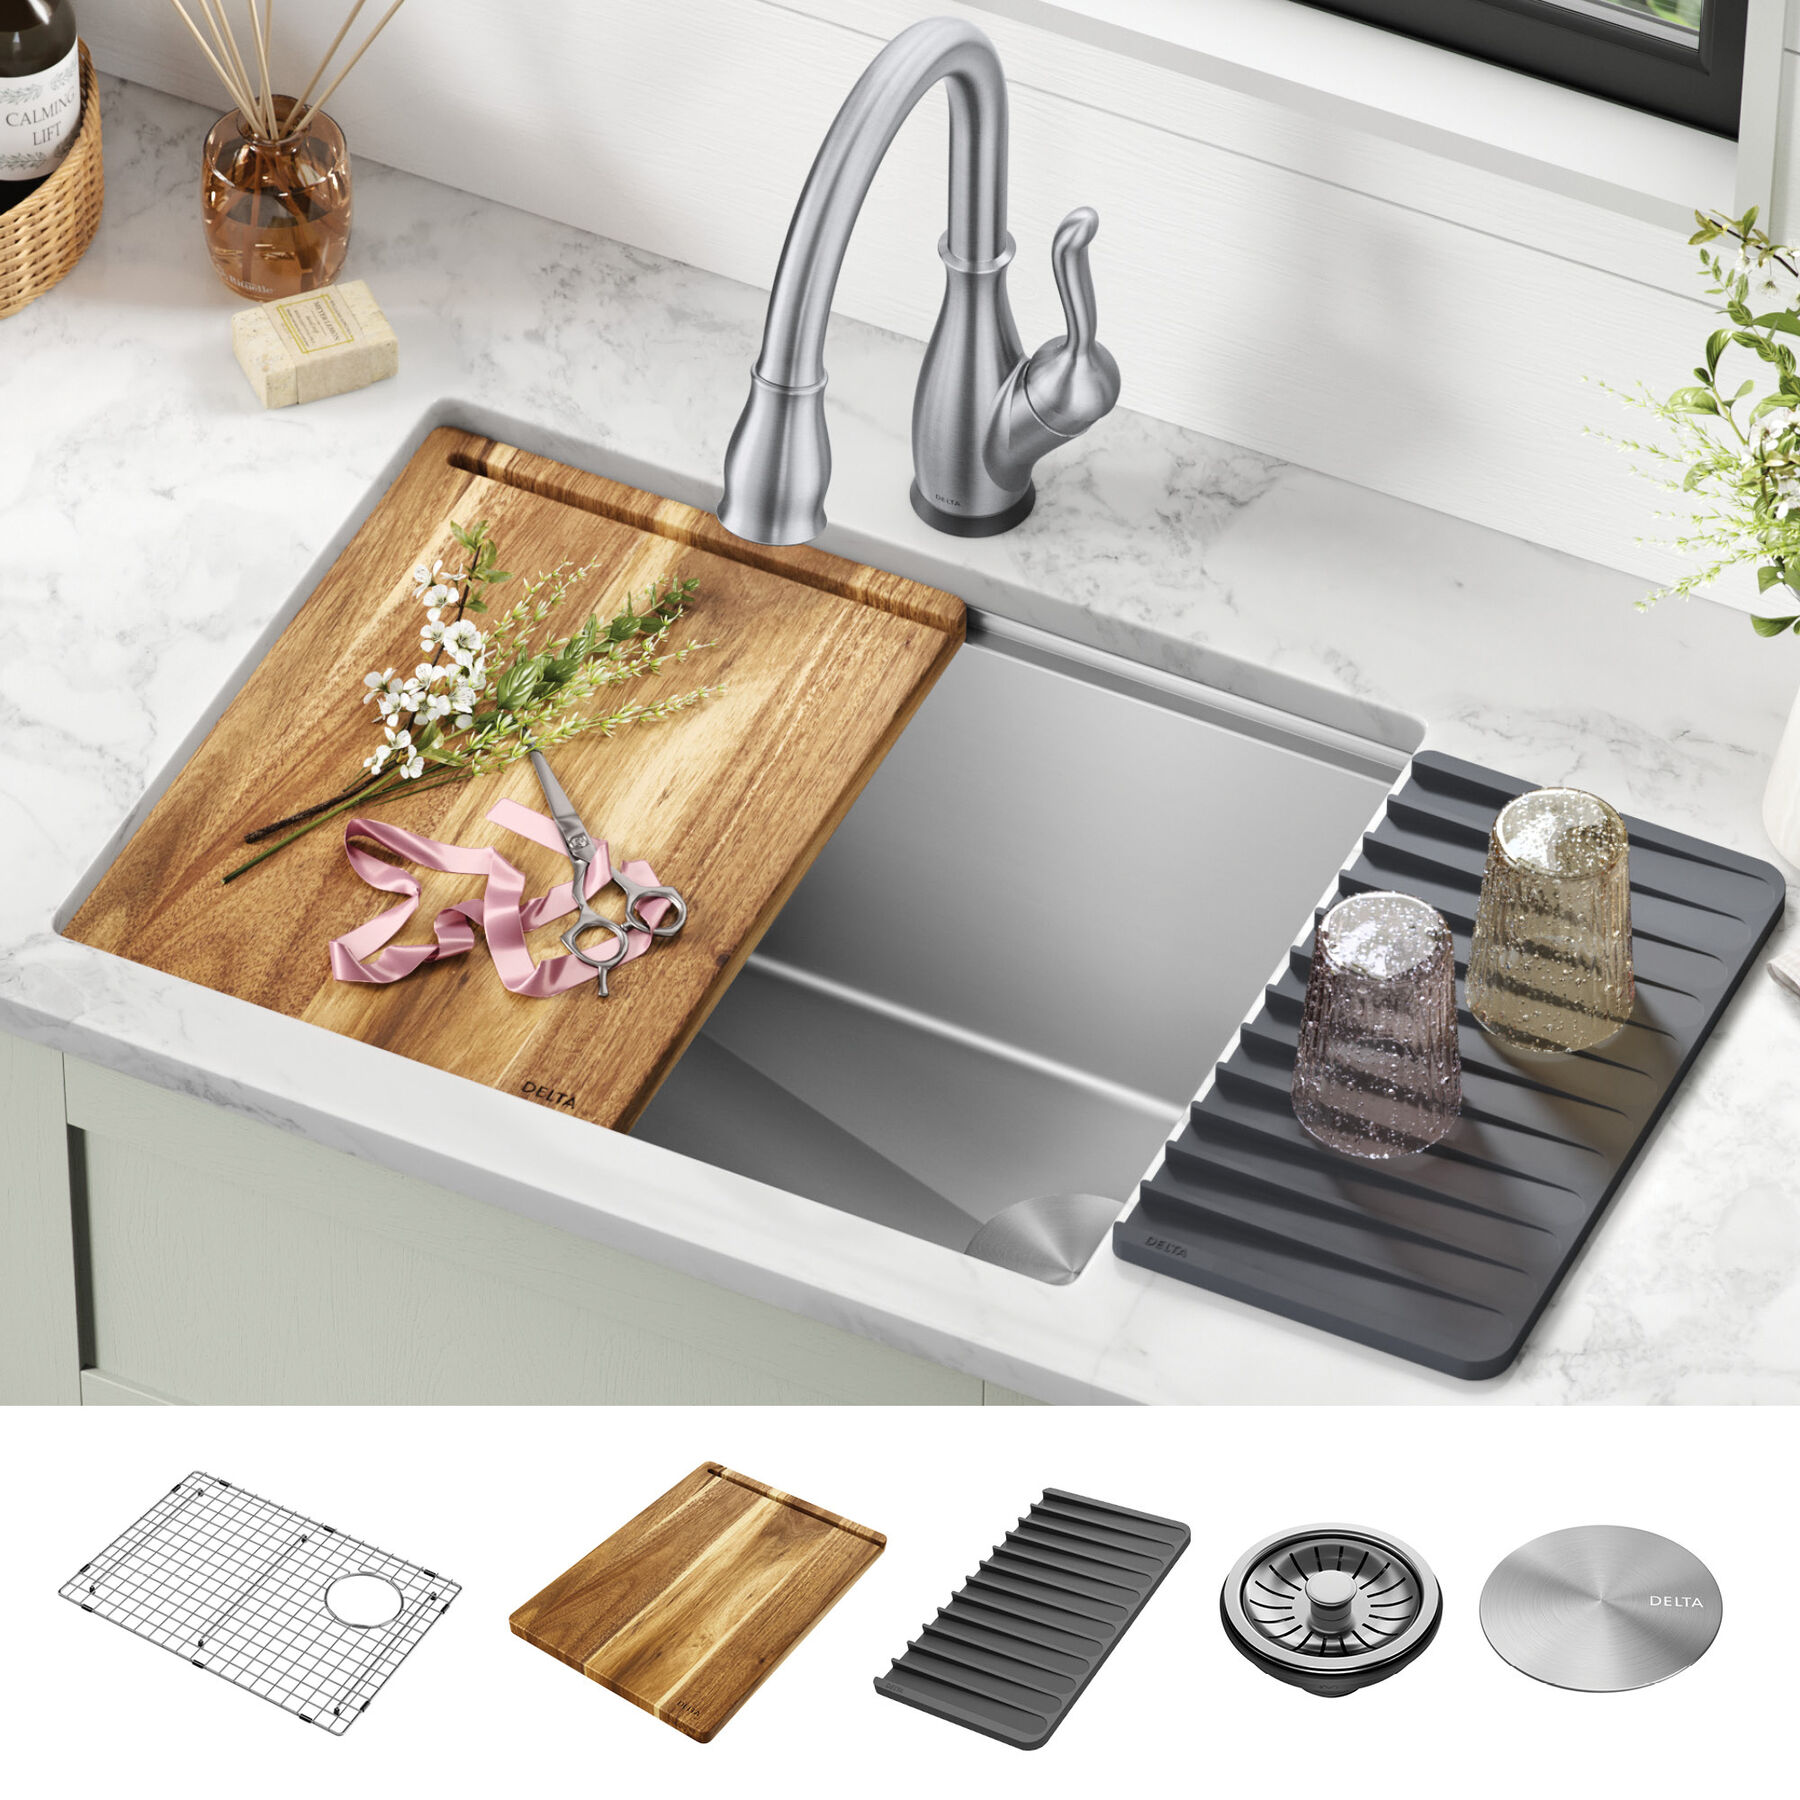 Clear Cutting Board For Kitchen With With Non S 24 Wide X 16 Long (Small)  